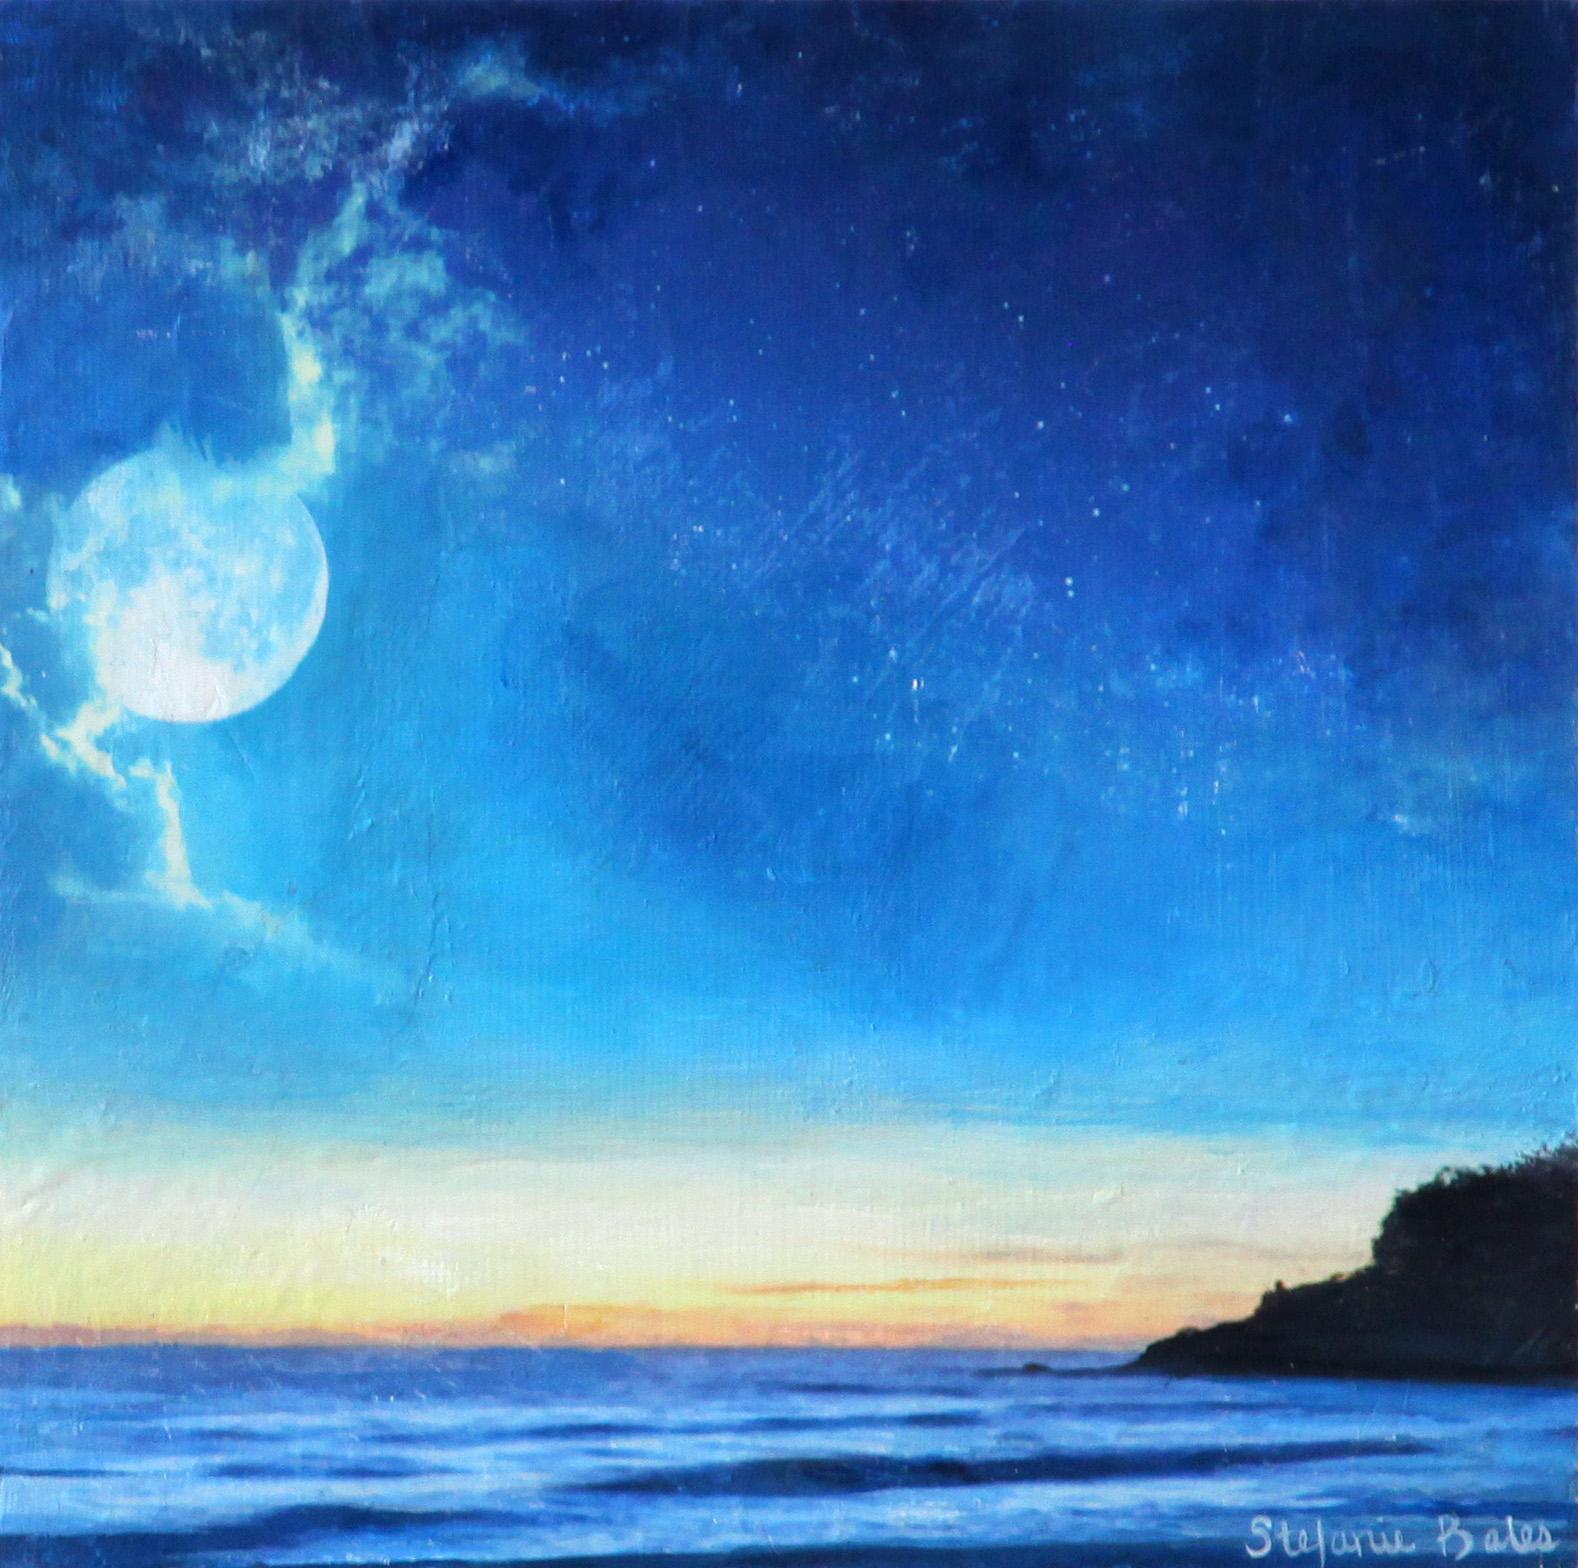 Stefanie Bales Landscape Painting - An Impressionist Acrylic & Ink on Wood Seascape Painting, "To Hang the Moon"